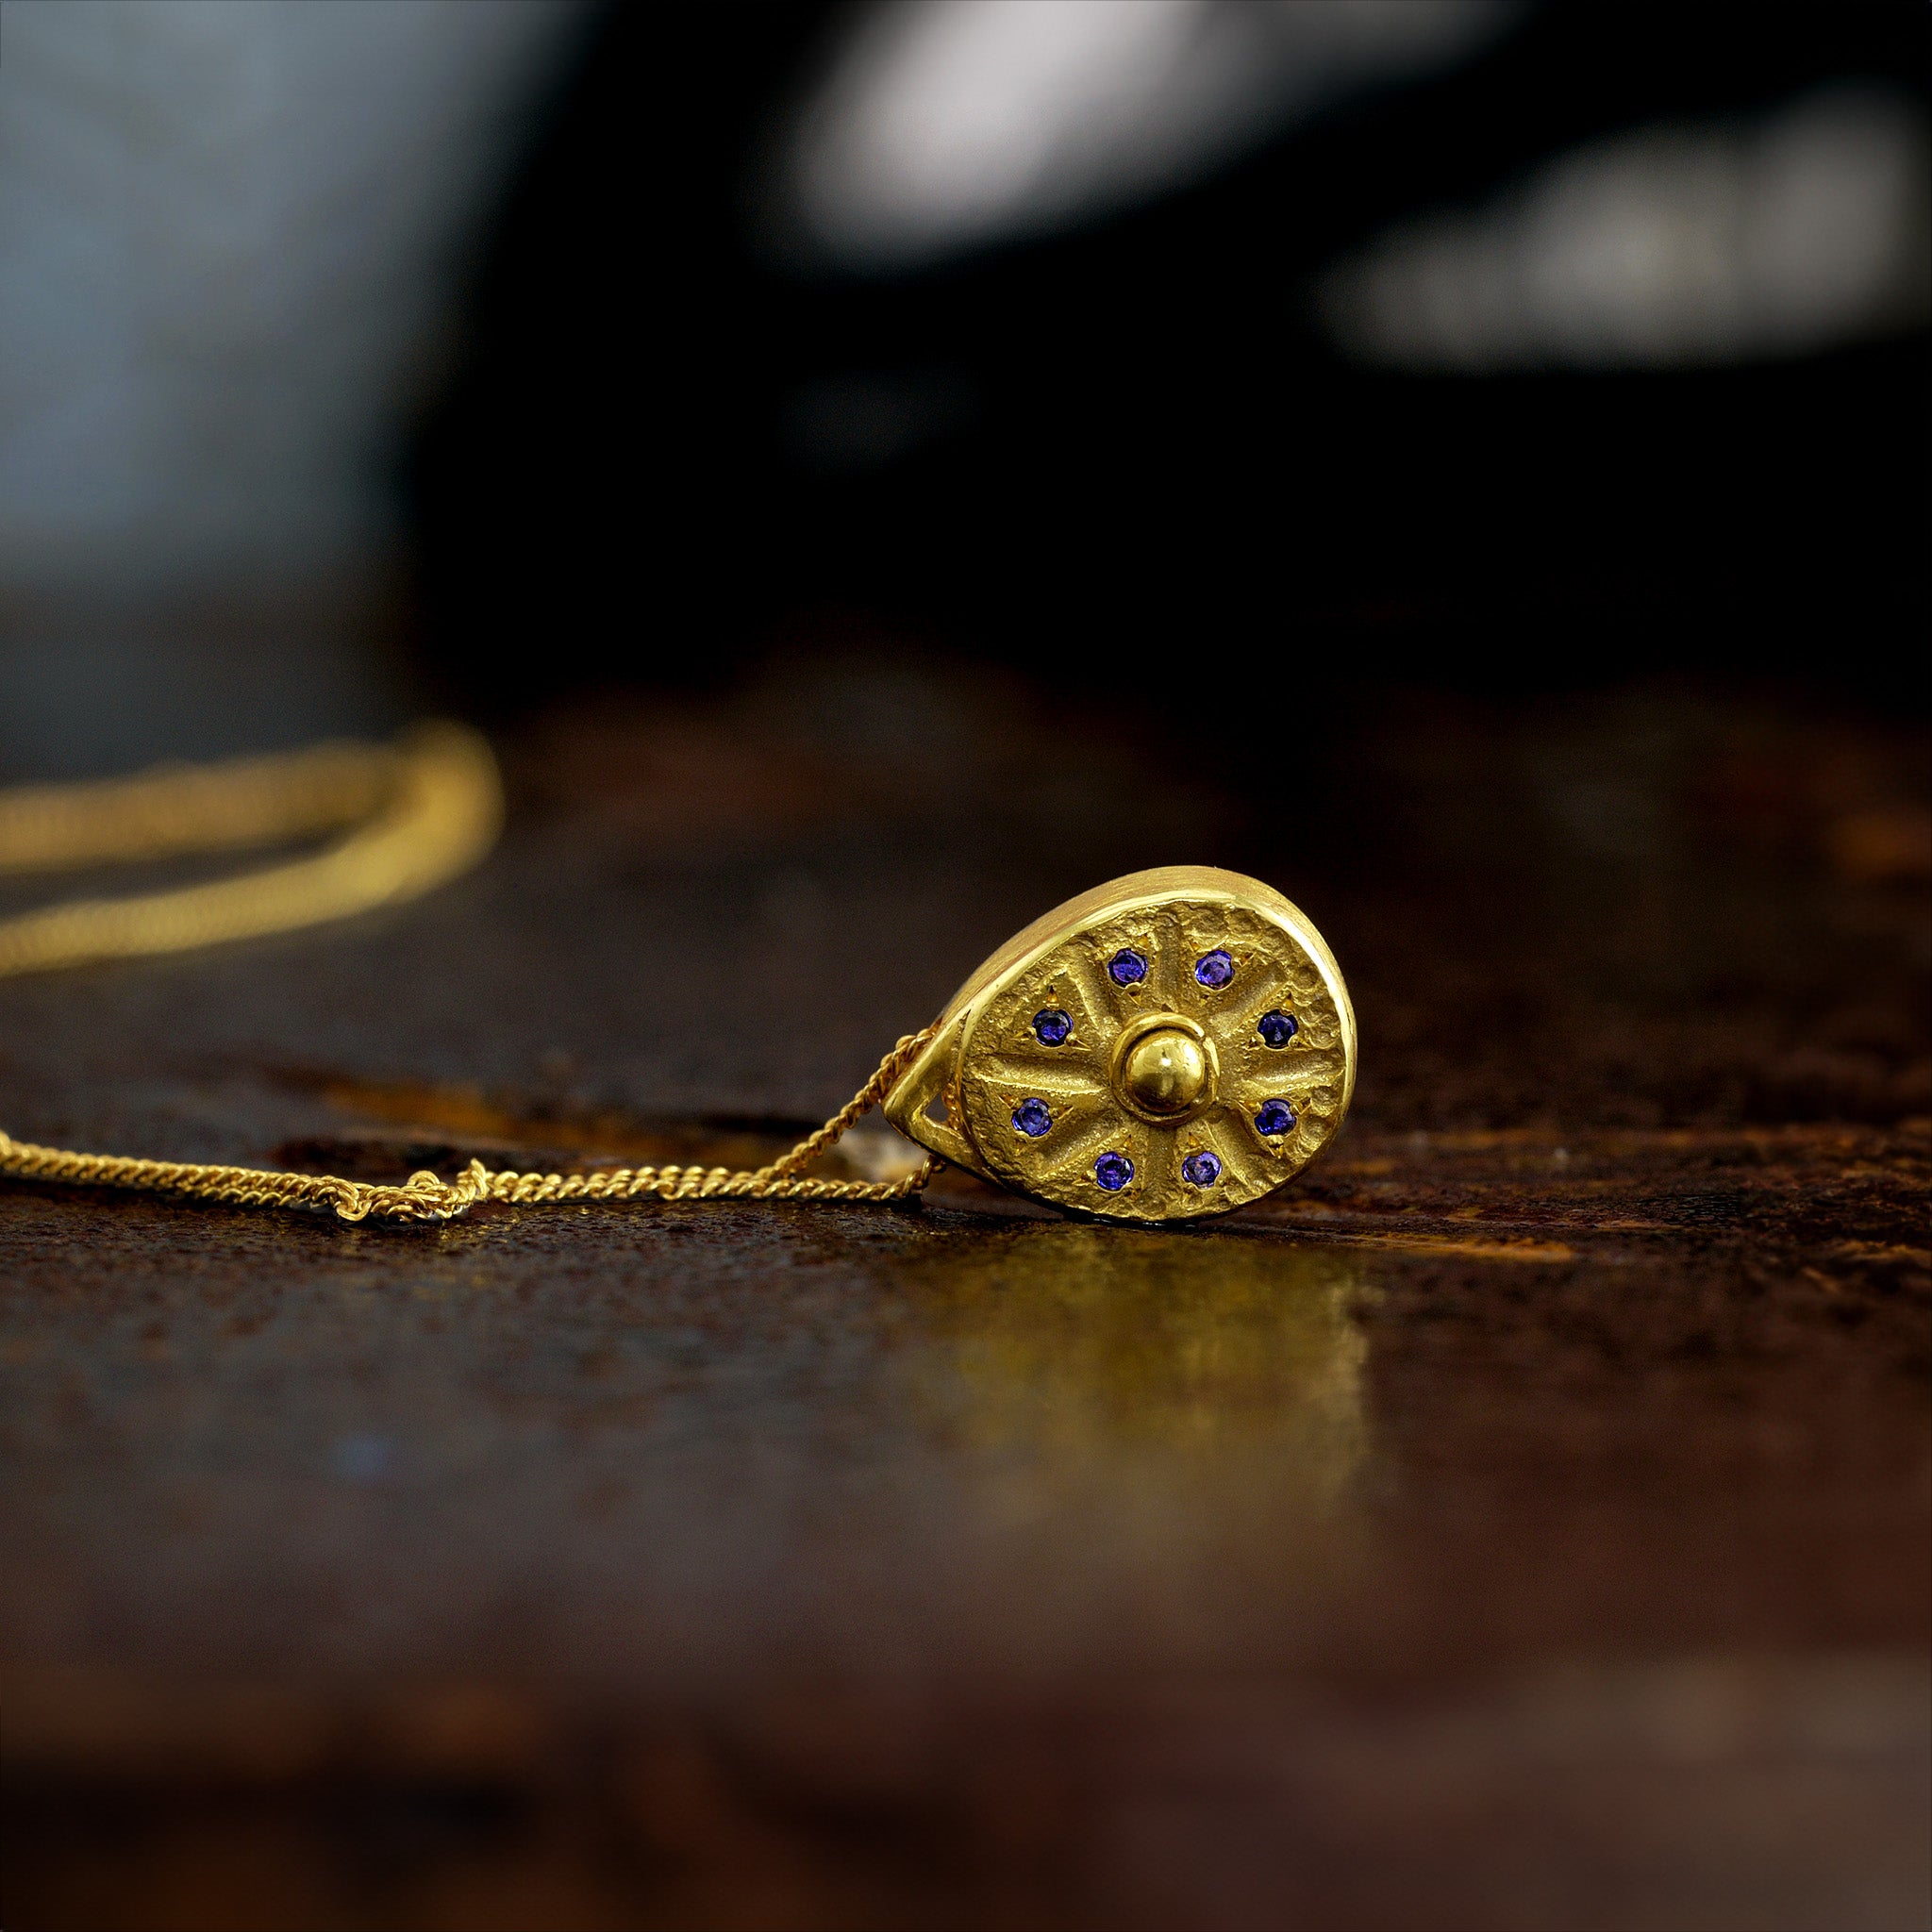 Close up of 18k Gold pendant on a dark rusty background. The pendant resembles a Sundial clock, accented with small Sapphires between the edges of each clock hand. A luxurious and timeless addition to any collection.